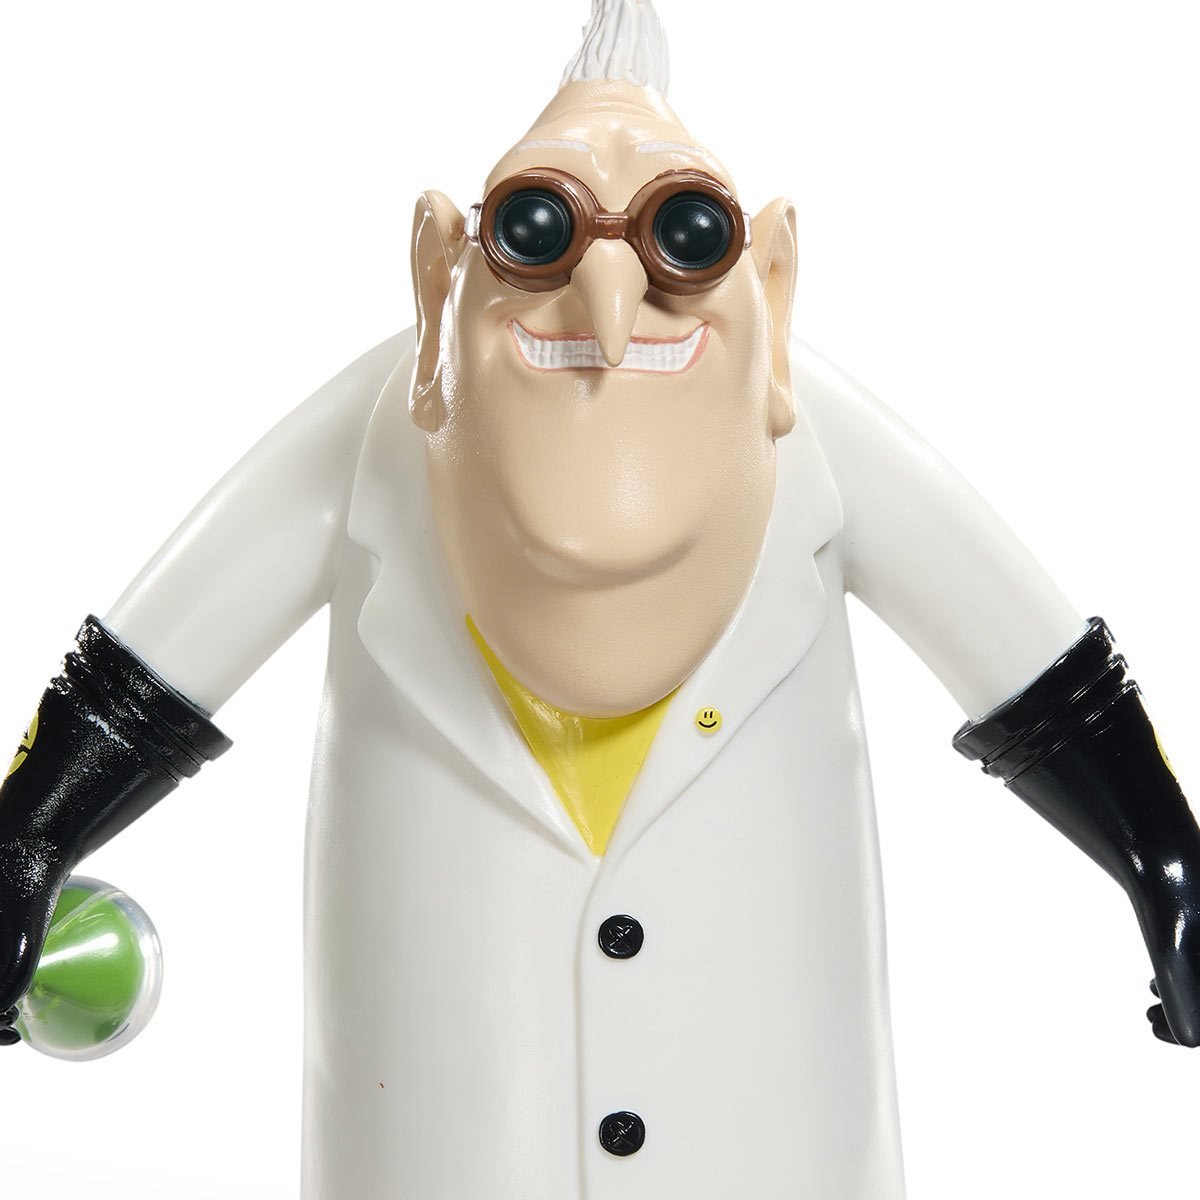 In Despicable Me, Dr. Nefario actually knew that Gru ordered a